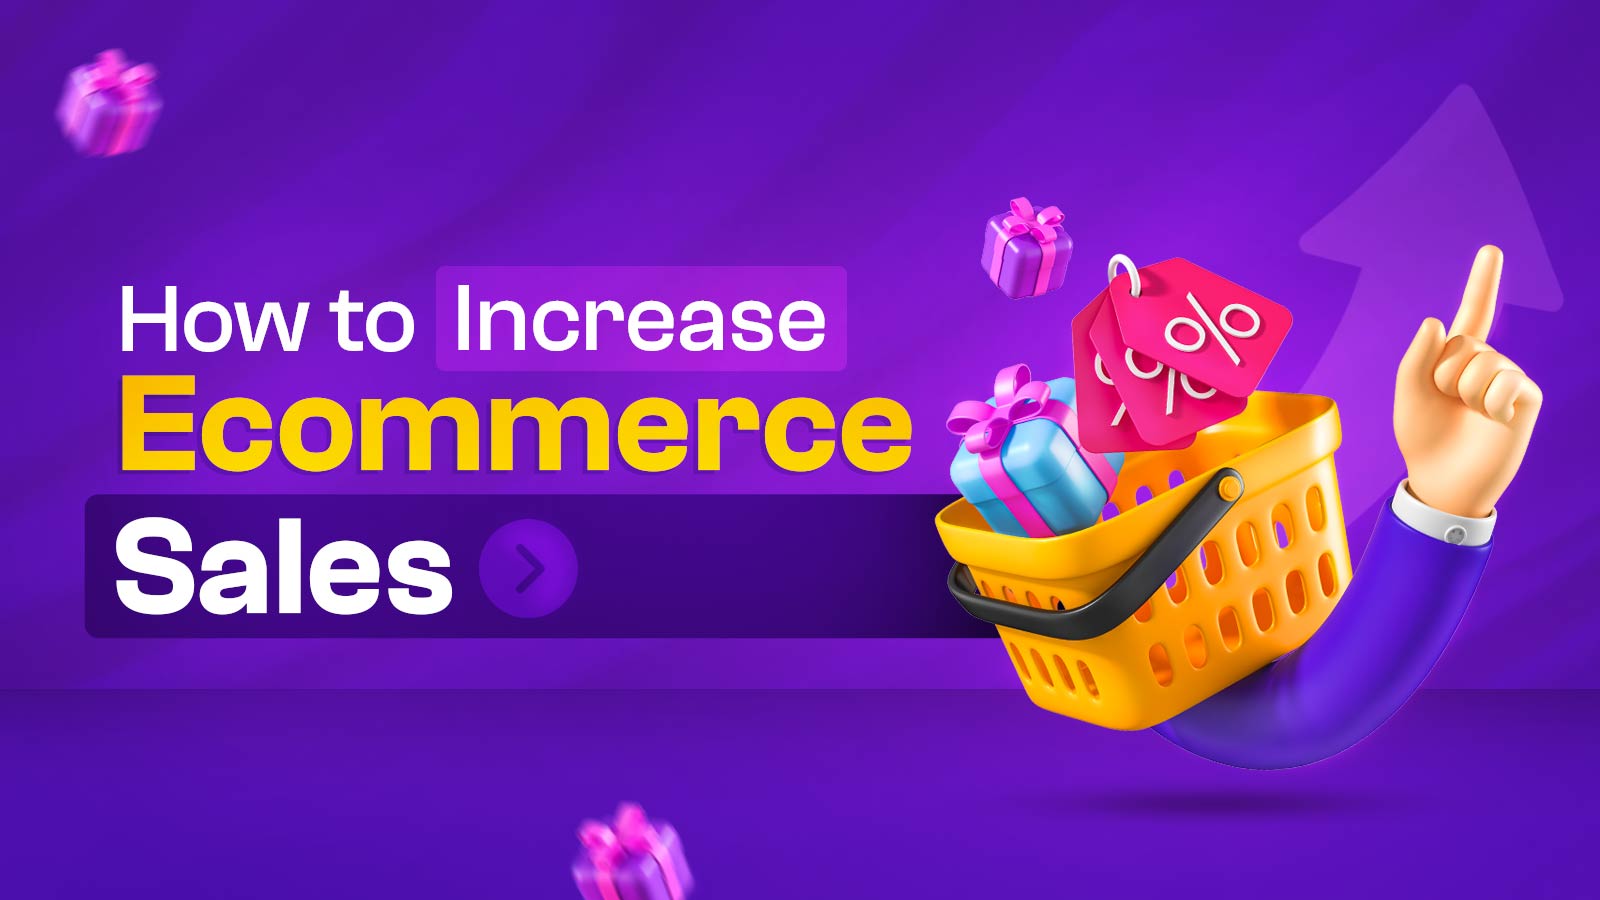 How To Increase Ecommerce Sales?- 14 Proven Ways!